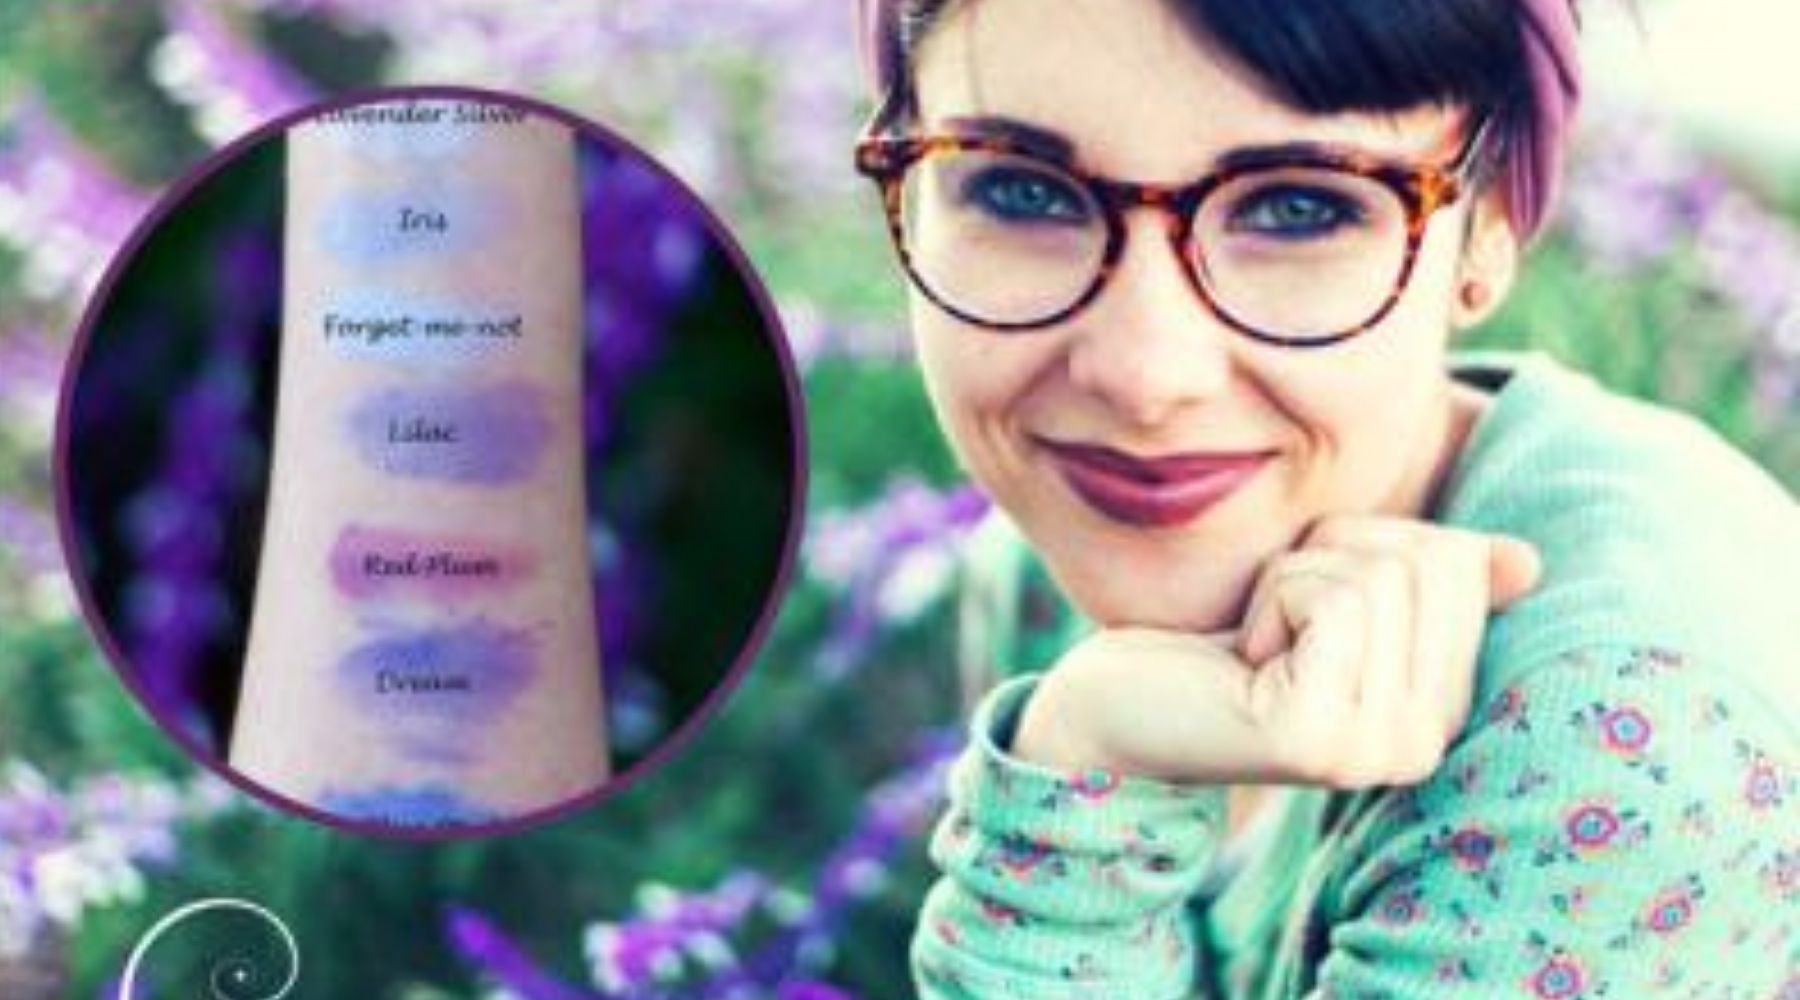 purple shadow swatches with young woman in glasses